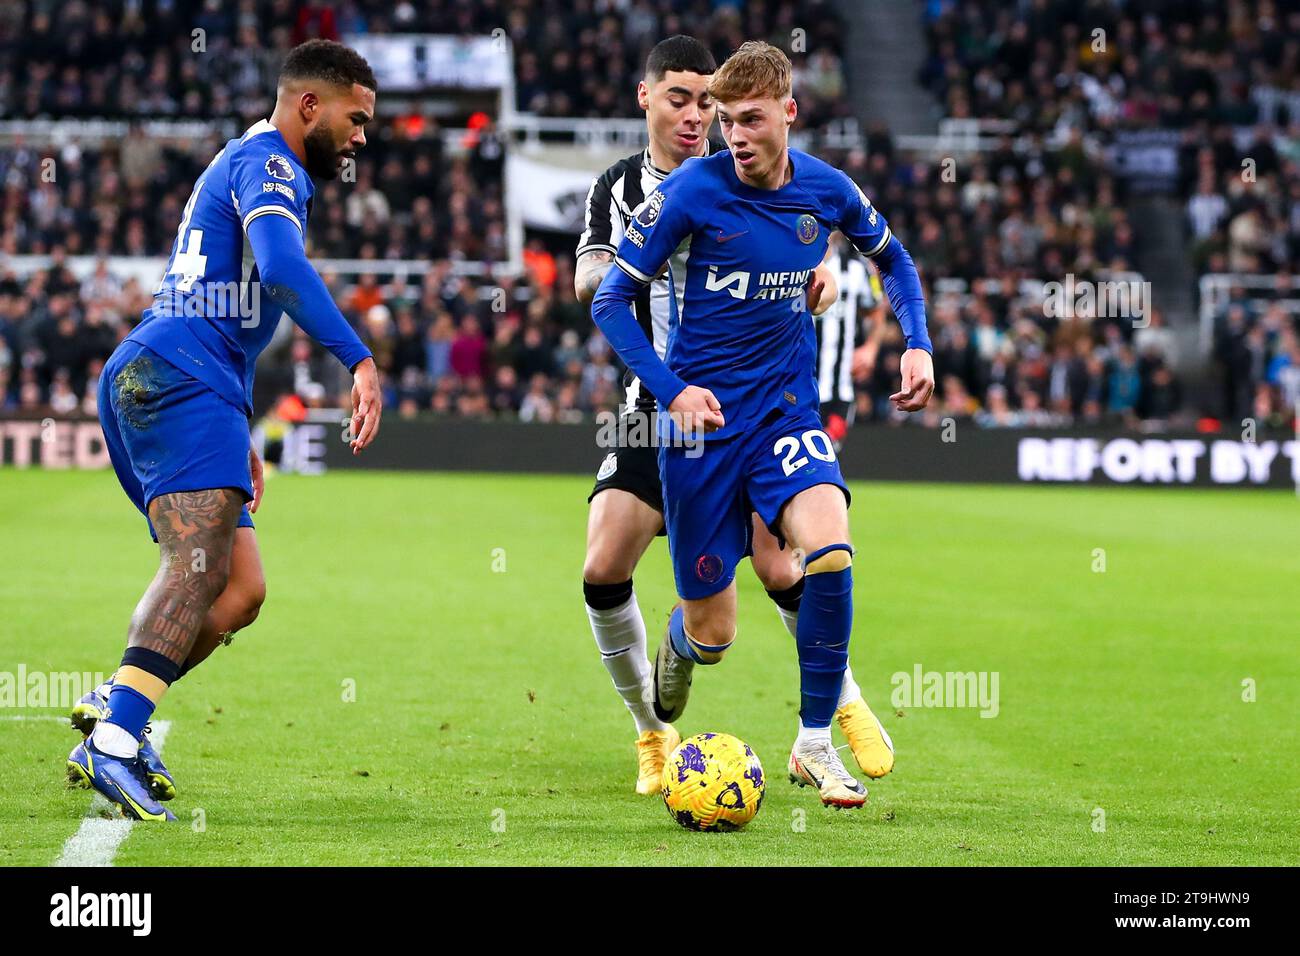 Newcastle, UK. 25th Nov, 2023. Cole Palmer #20 of Chelsea defends possession from Miguel Almir-n #24 of Newcastle United during the Premier League match Newcastle United vs Chelsea at St. James's Park, Newcastle, United Kingdom, 25th November 2023 (Photo by Ryan Crockett/News Images) Credit: News Images LTD/Alamy Live News Stock Photo